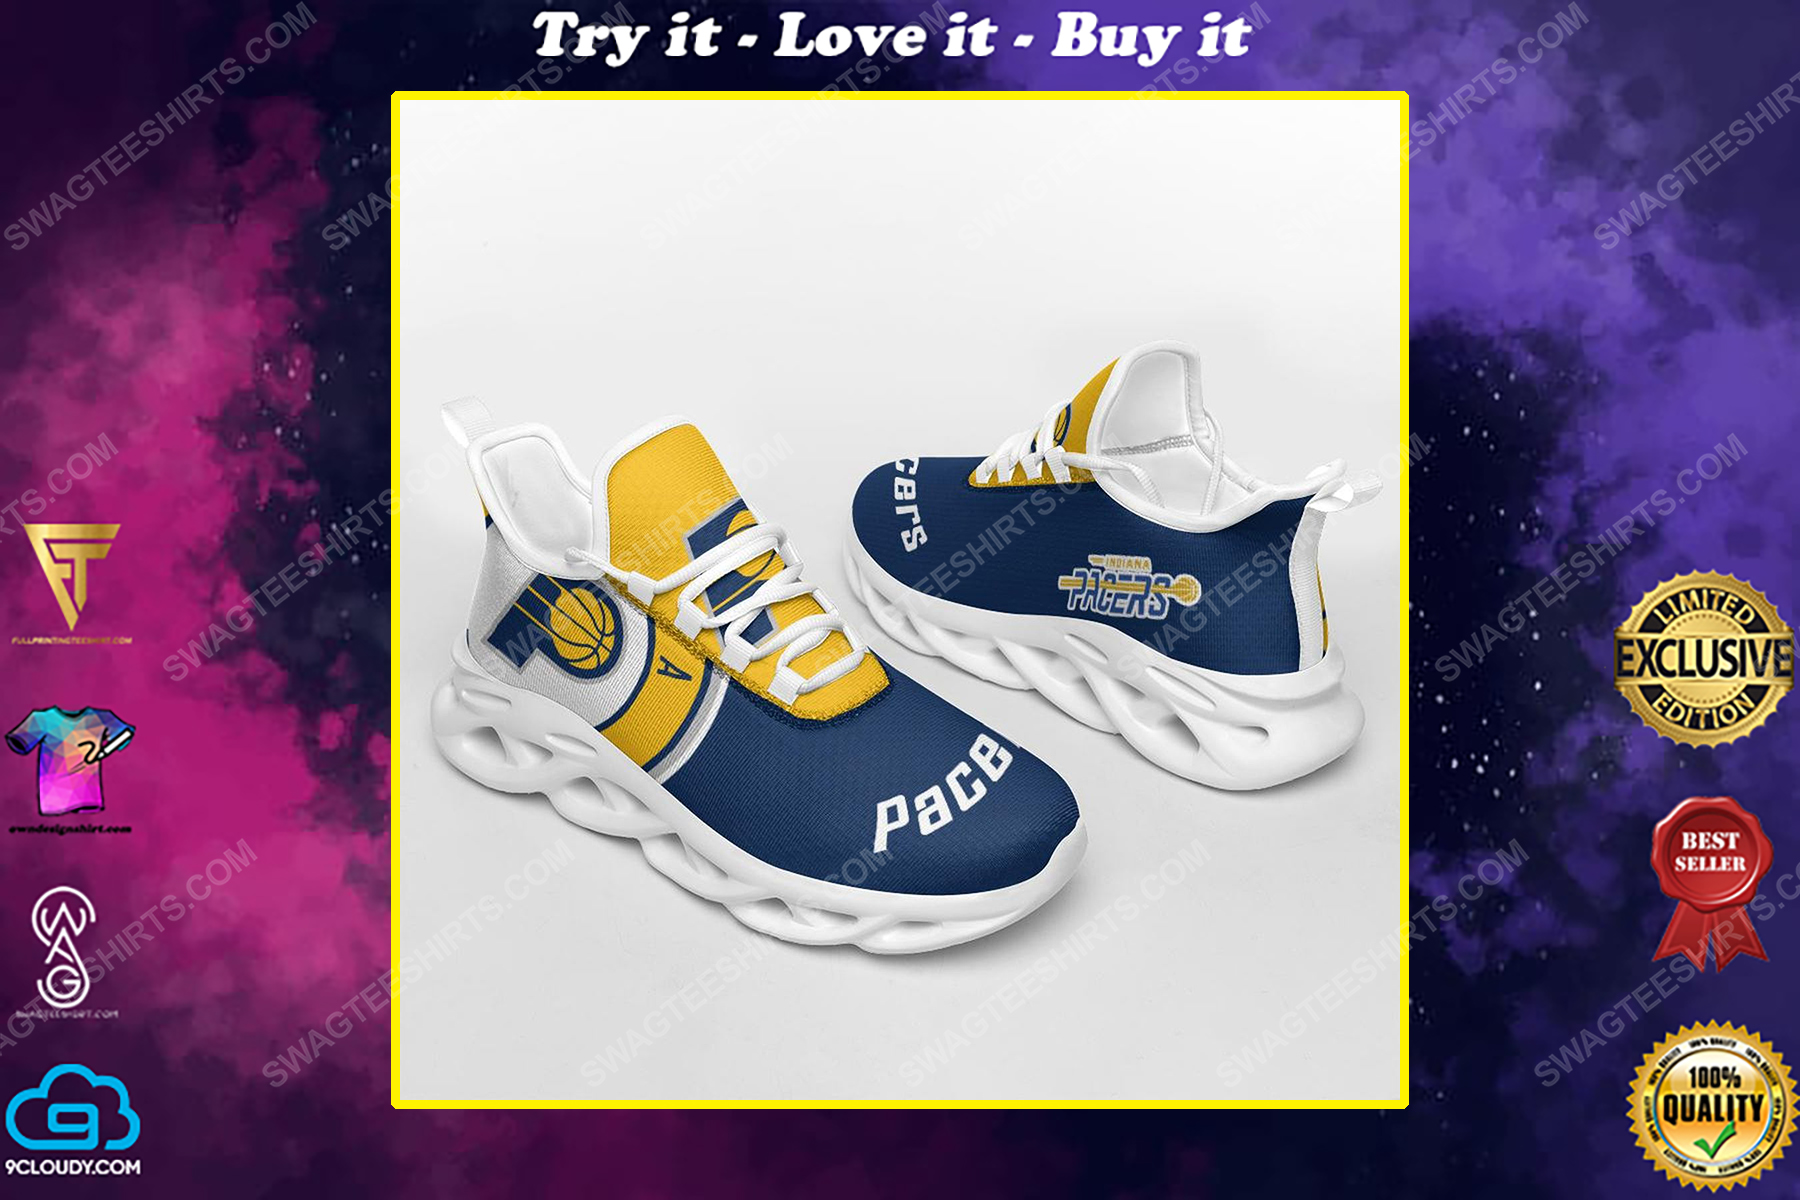 The indiana pacers basketball team max soul shoes